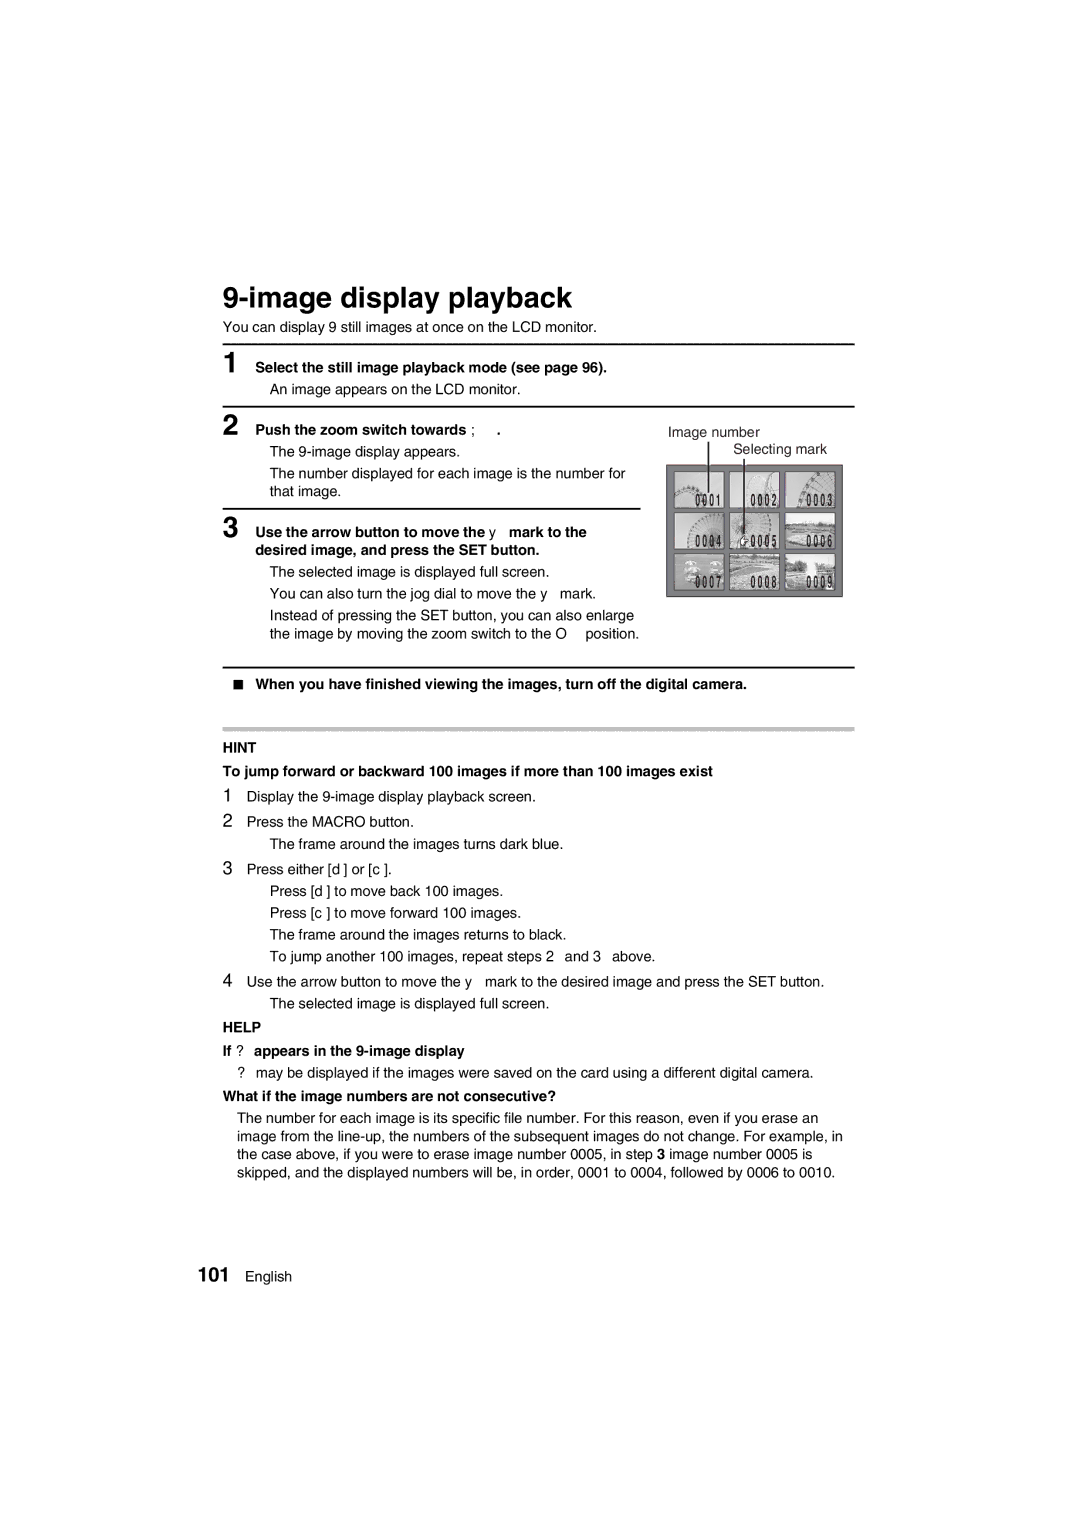 Sanyo VPC-AZ1E Image display playback, Push the zoom switch towards, If ?appears in the 9-image display 